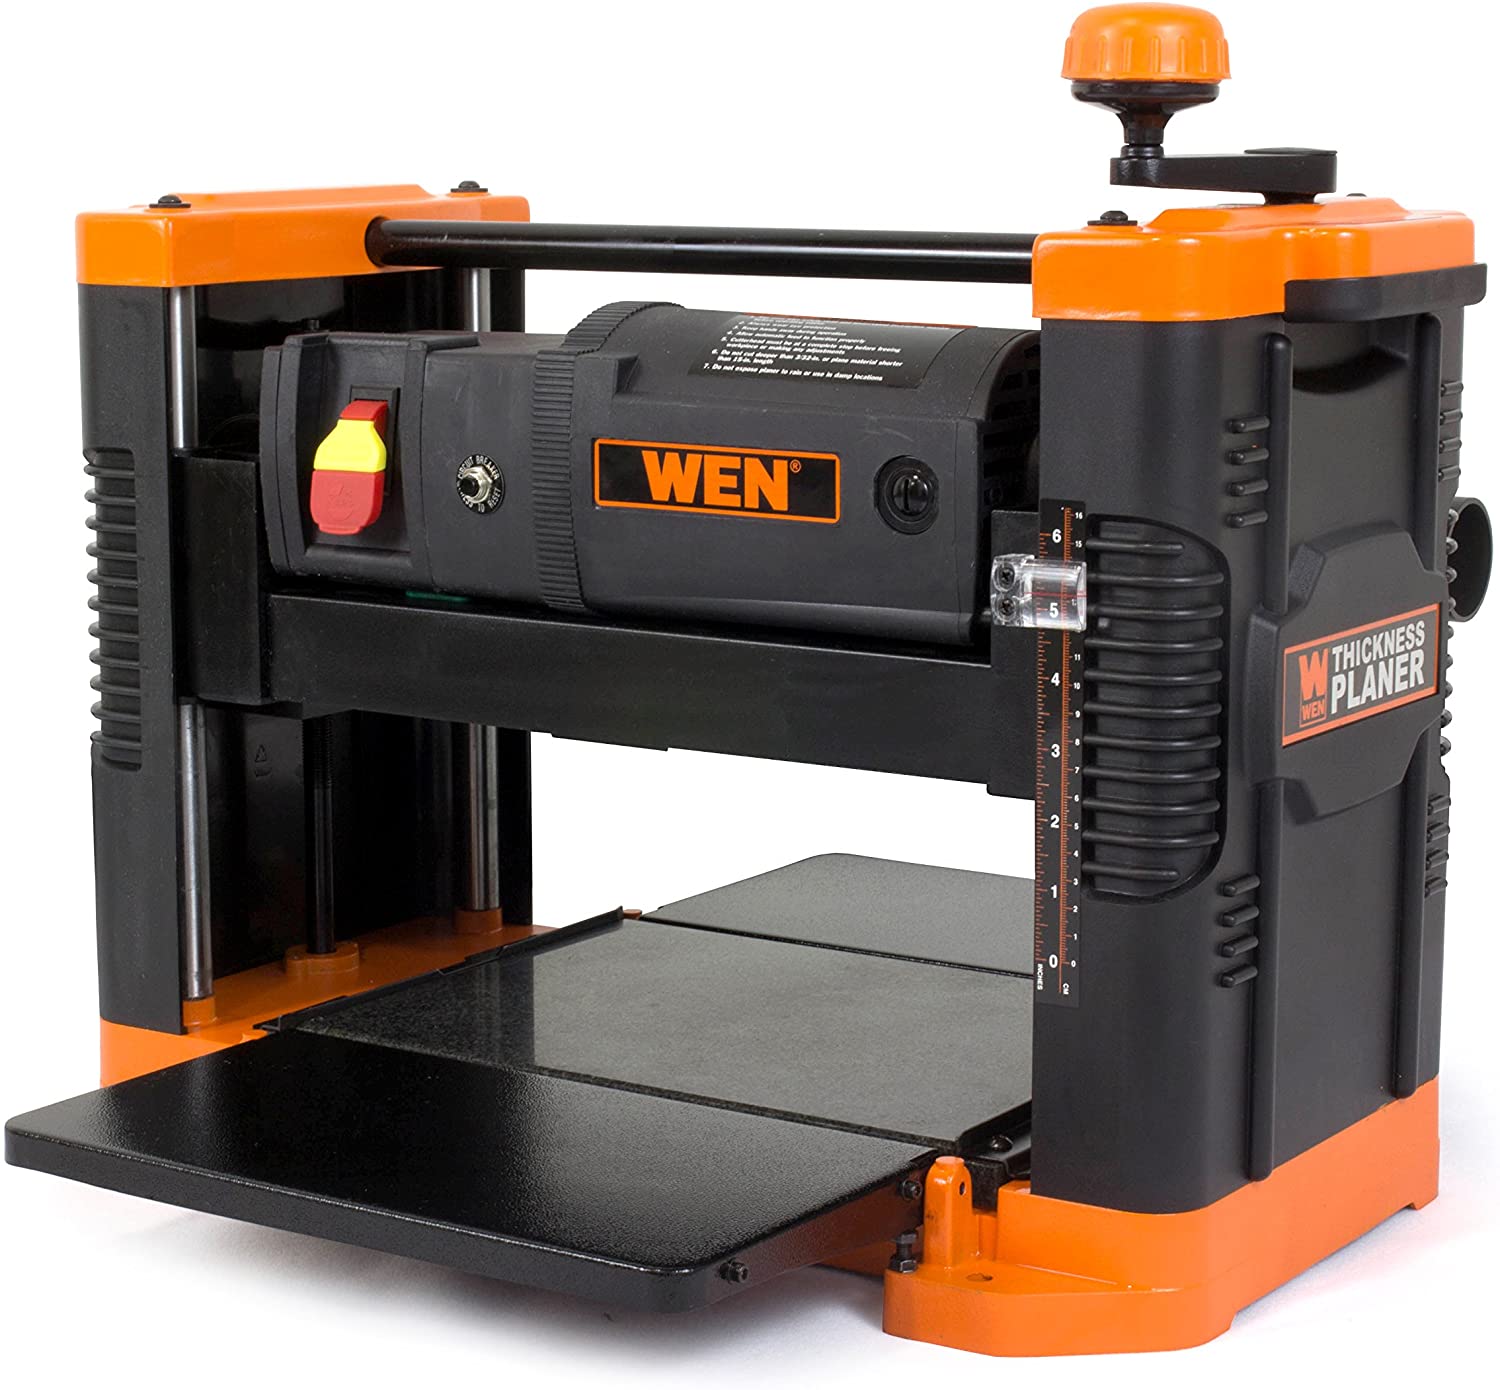 WEN 6550T Benchtop Thickness Planer